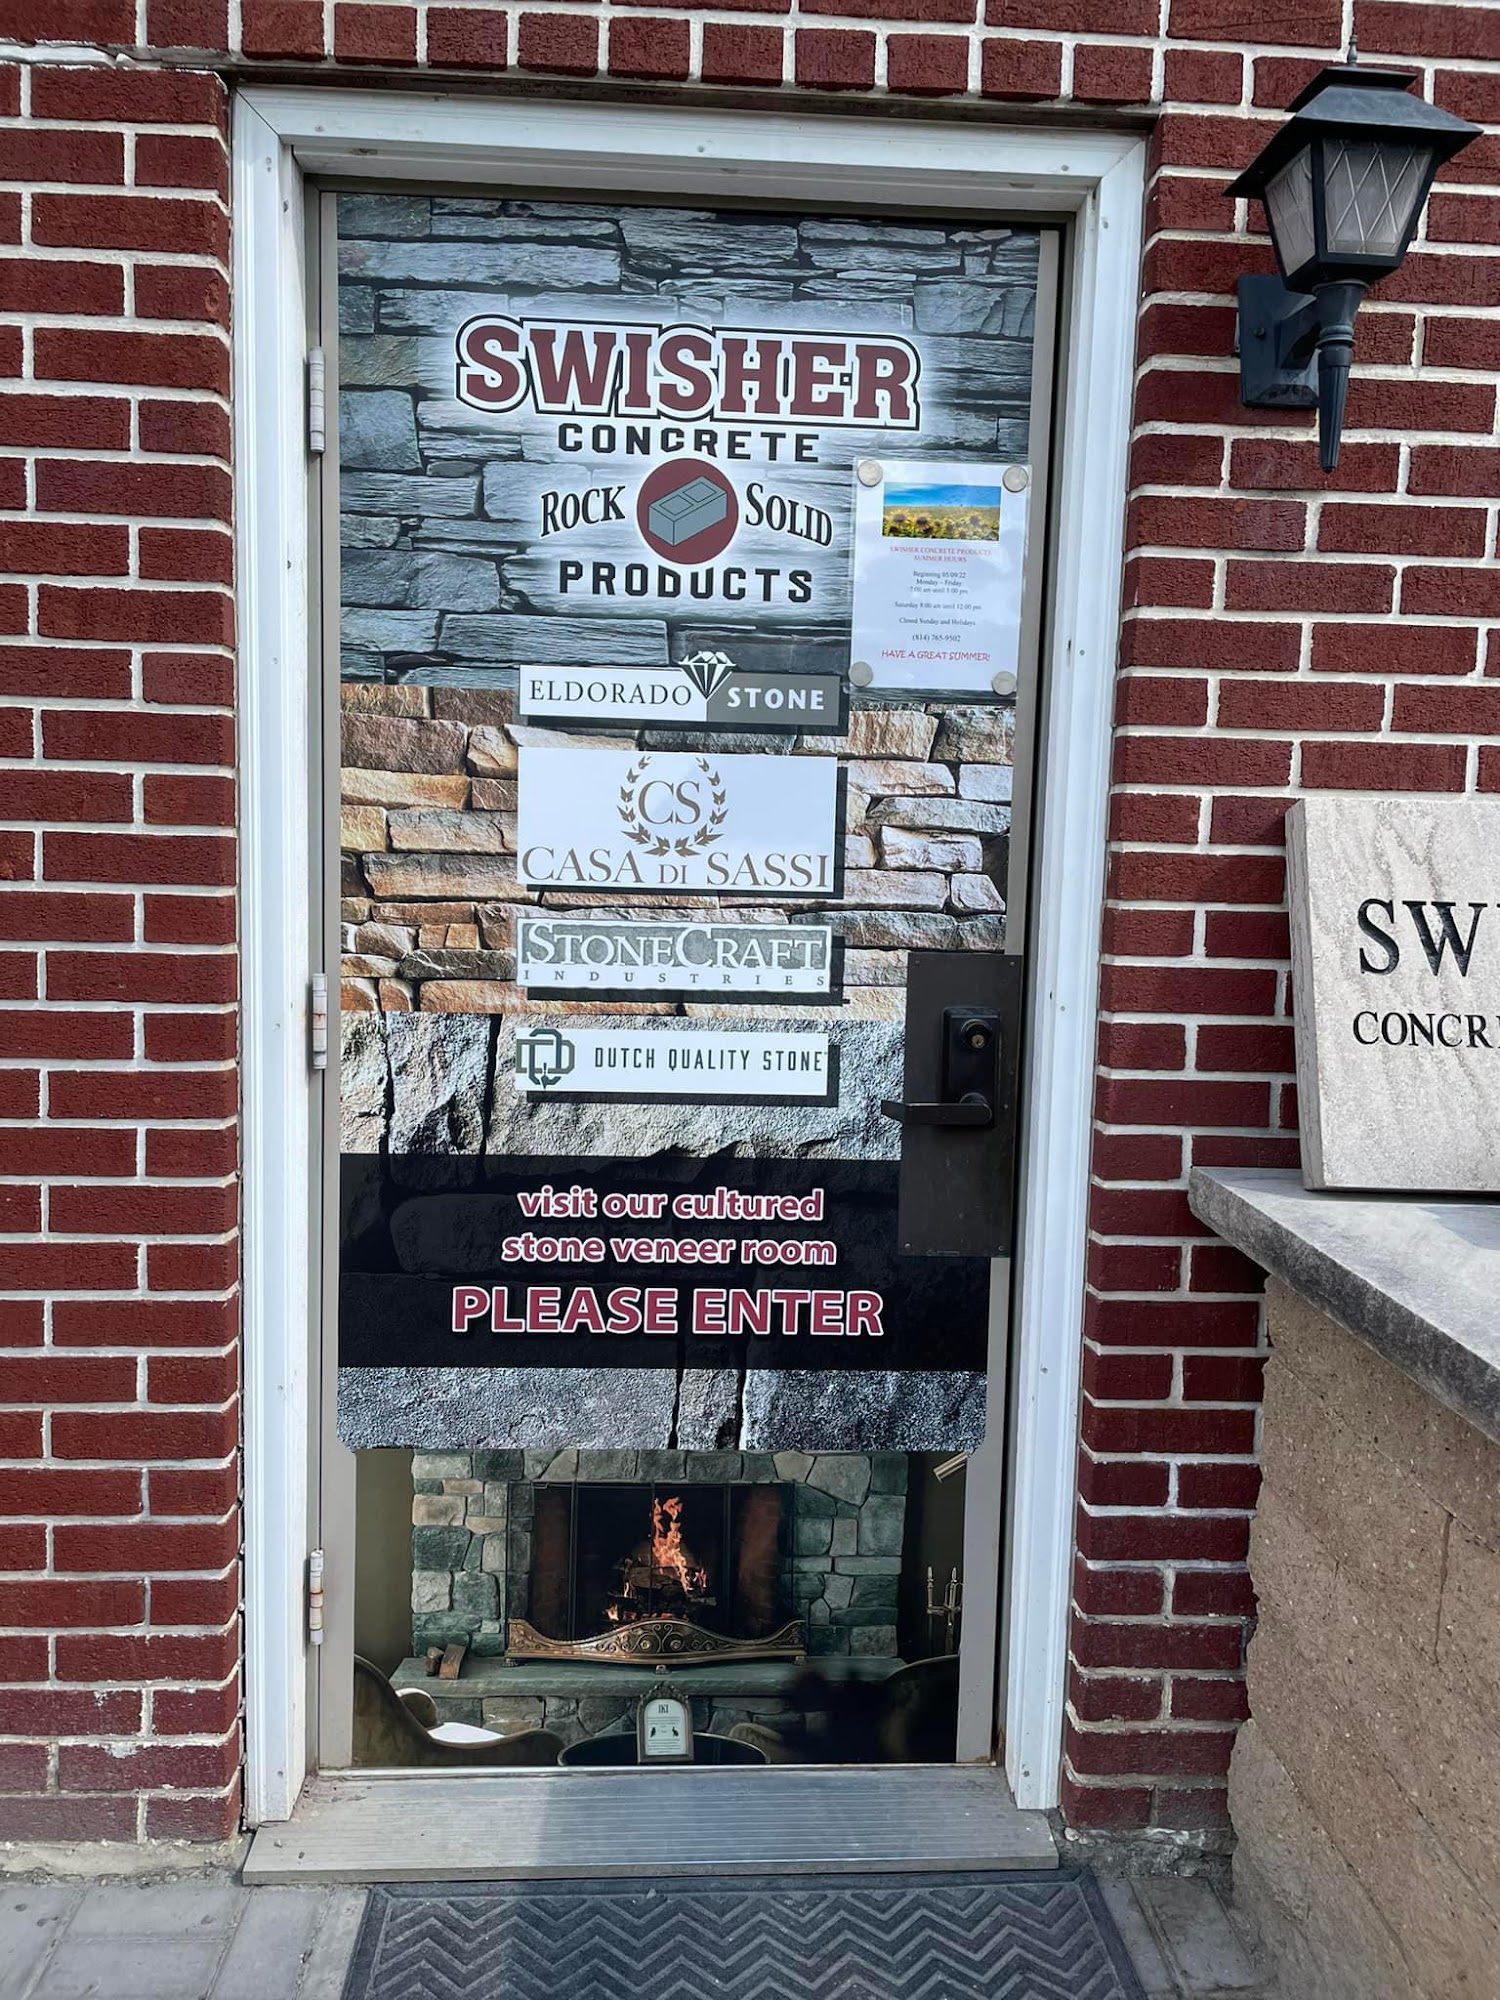 Swisher Concrete Products 9428 Clearfield Curwensville Hwy, Clearfield Pennsylvania 16830